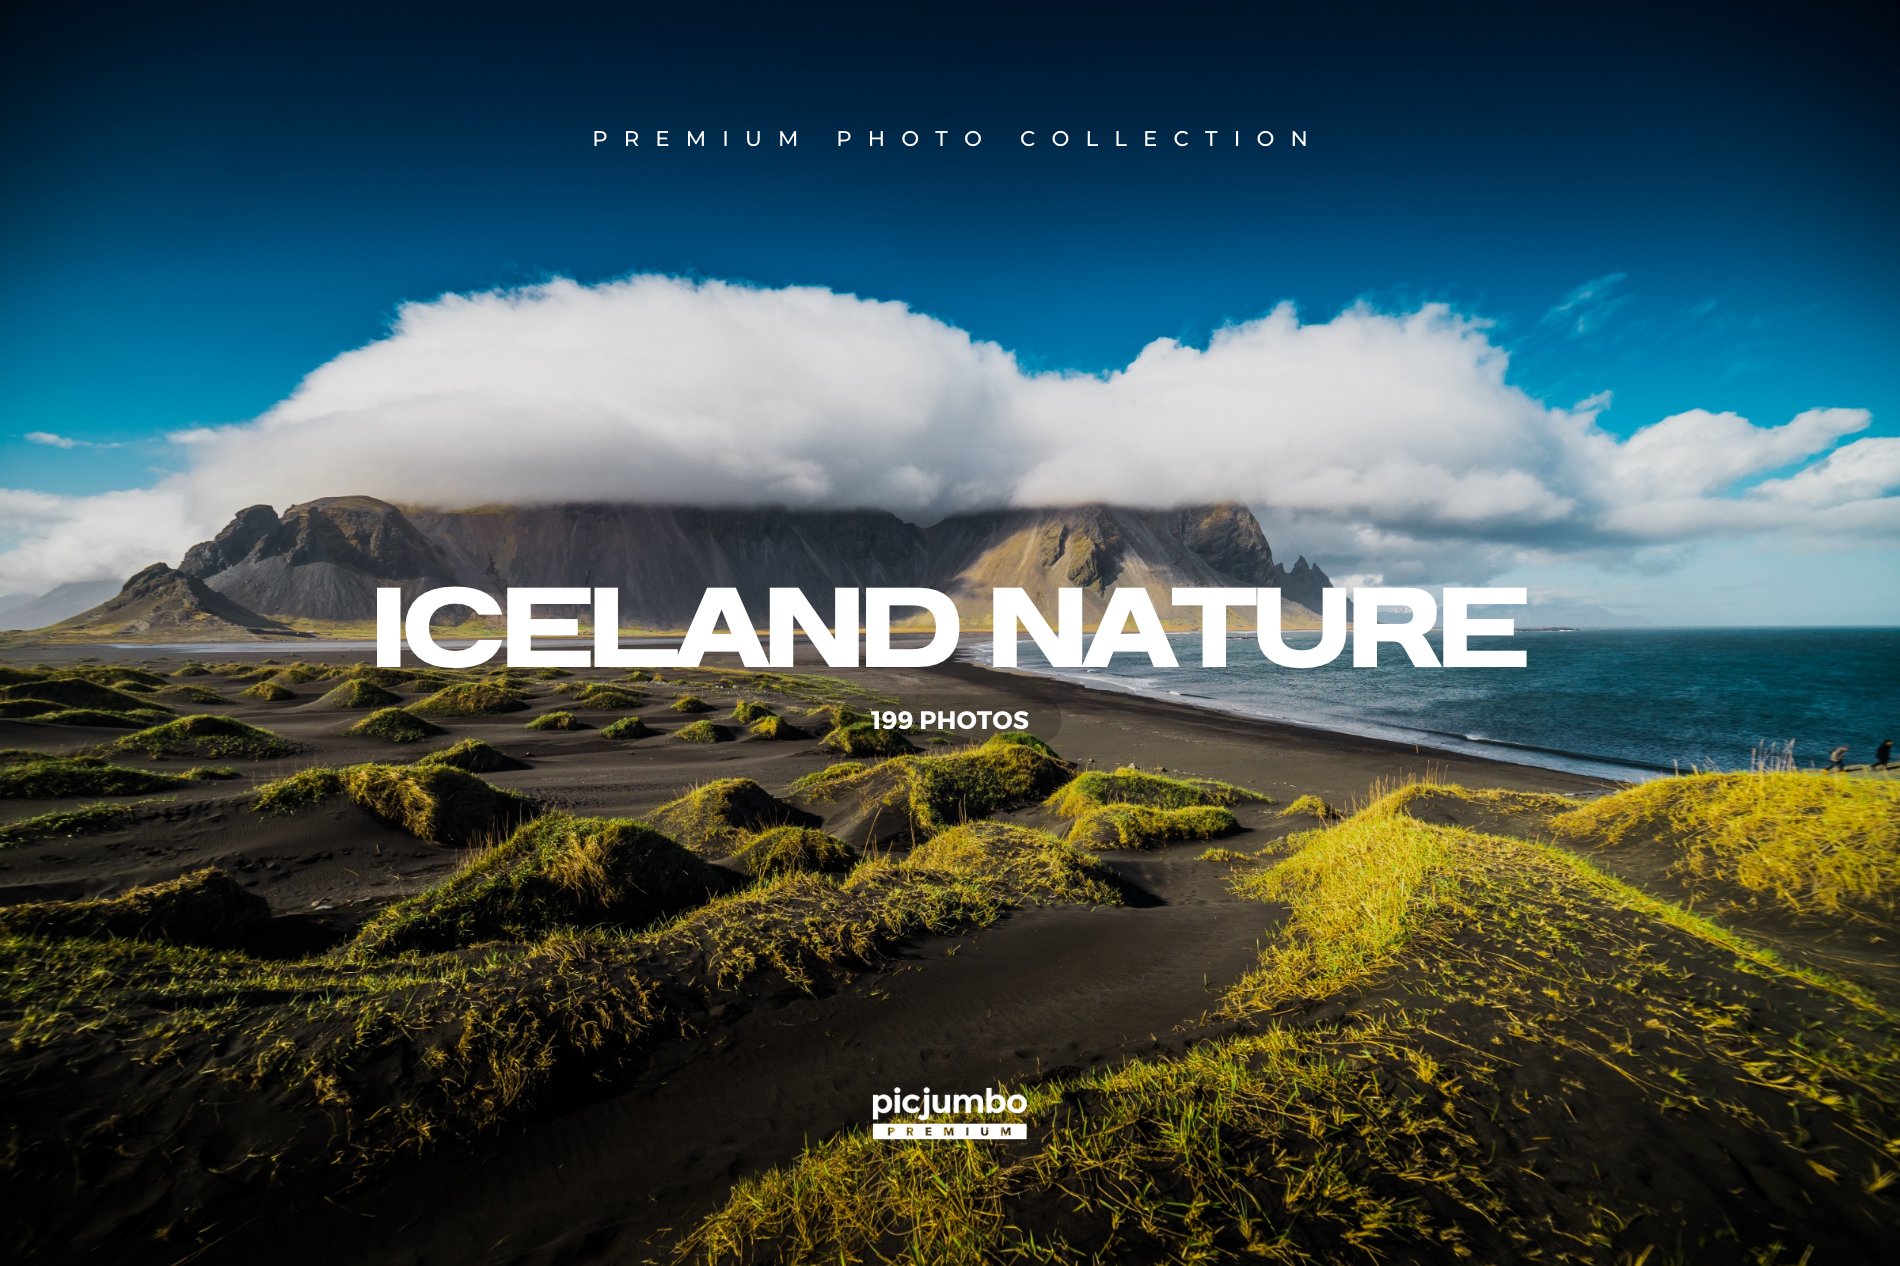 Download hi-res stock photos from our Iceland Nature PREMIUM Collection!